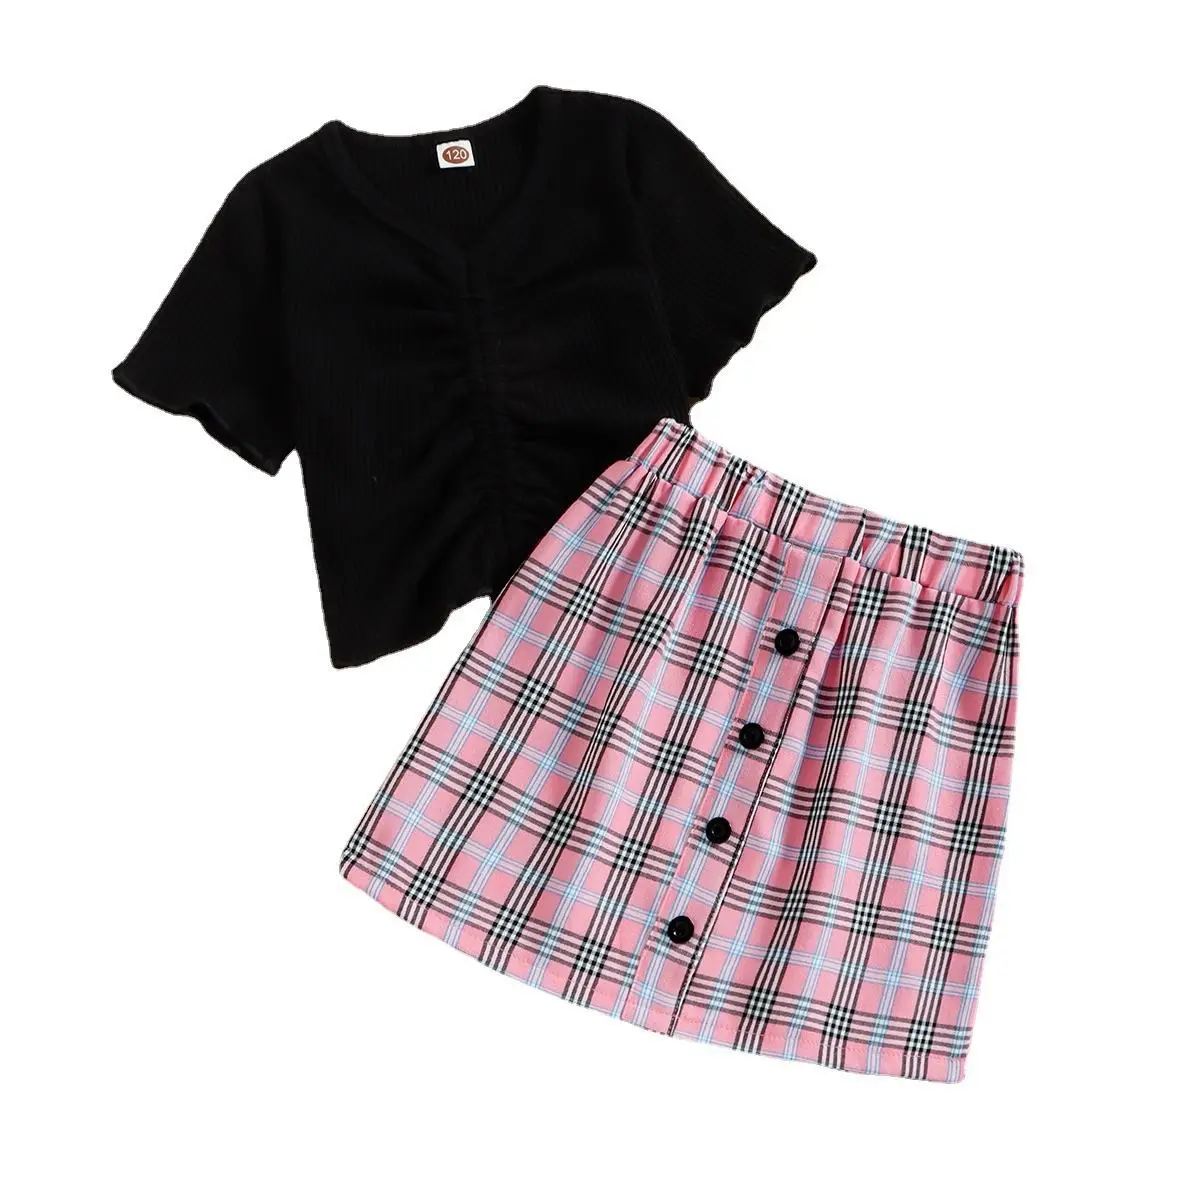 New arrival children clothes short sleeve shirt+plaid button skirt kids clothing fashion toddler baby girls outfits